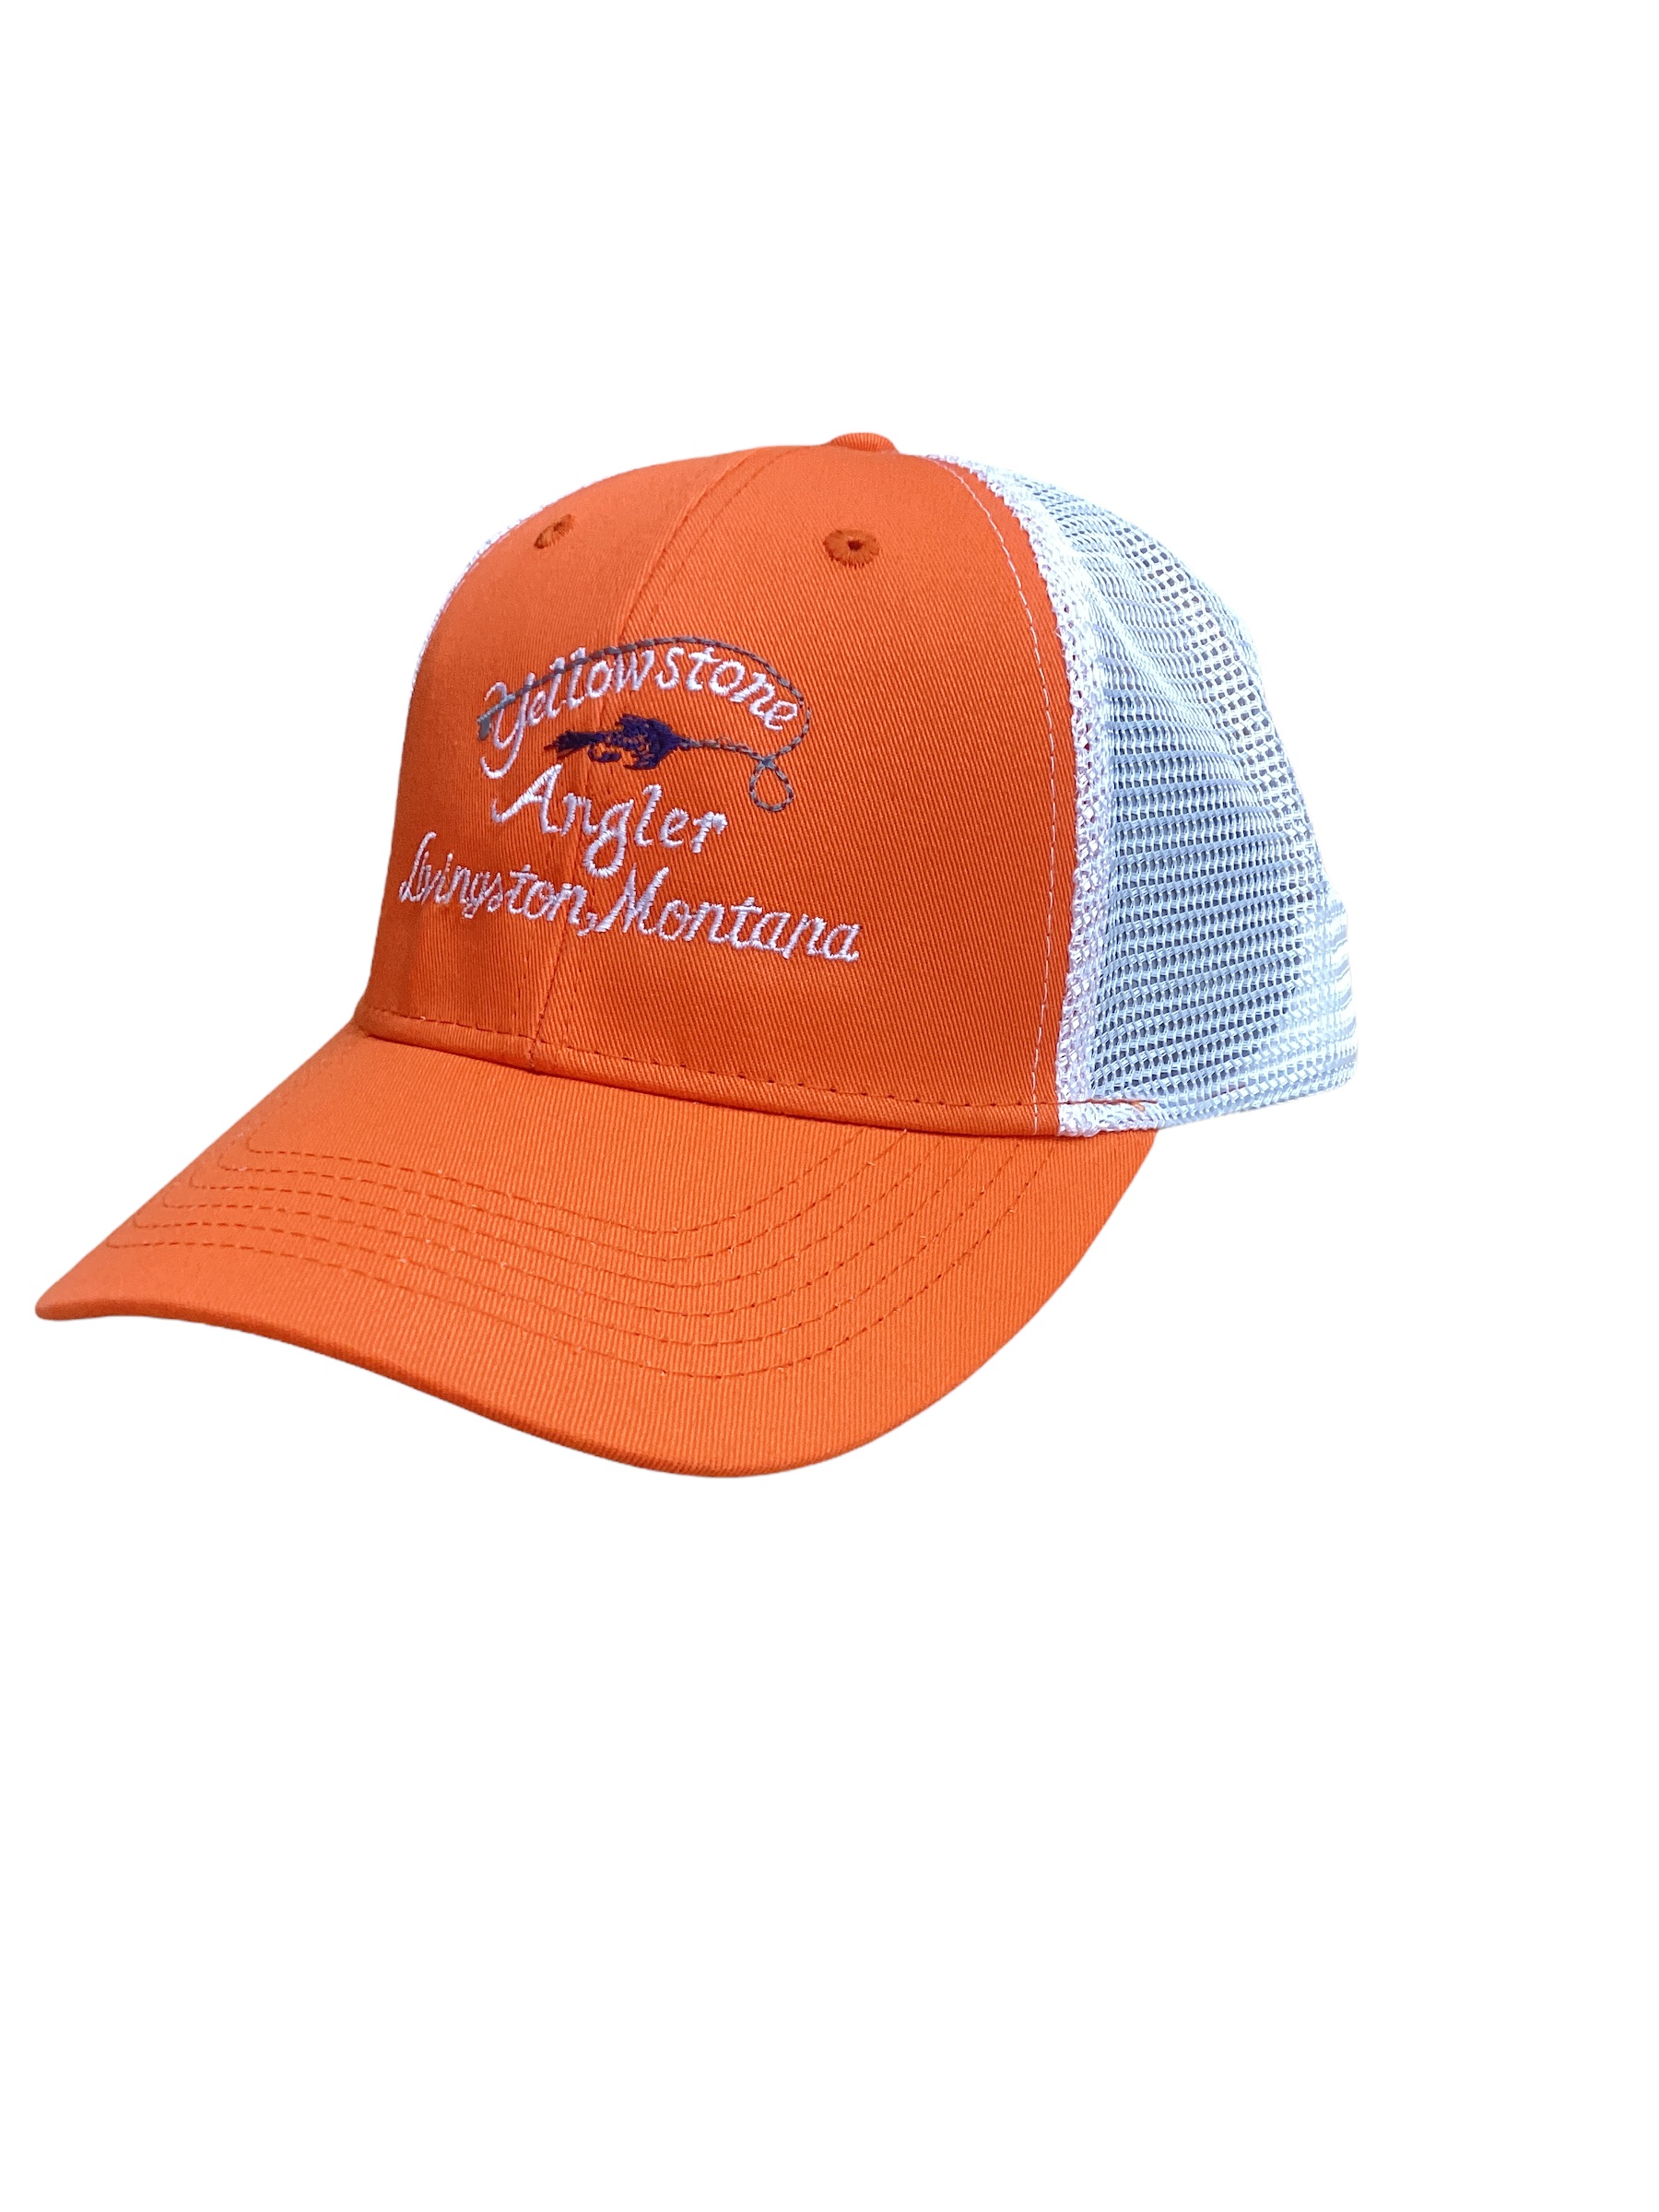 Shop For Fly Fishing Gear » Online Inventory » Yellowstone Angler | Baseball Caps